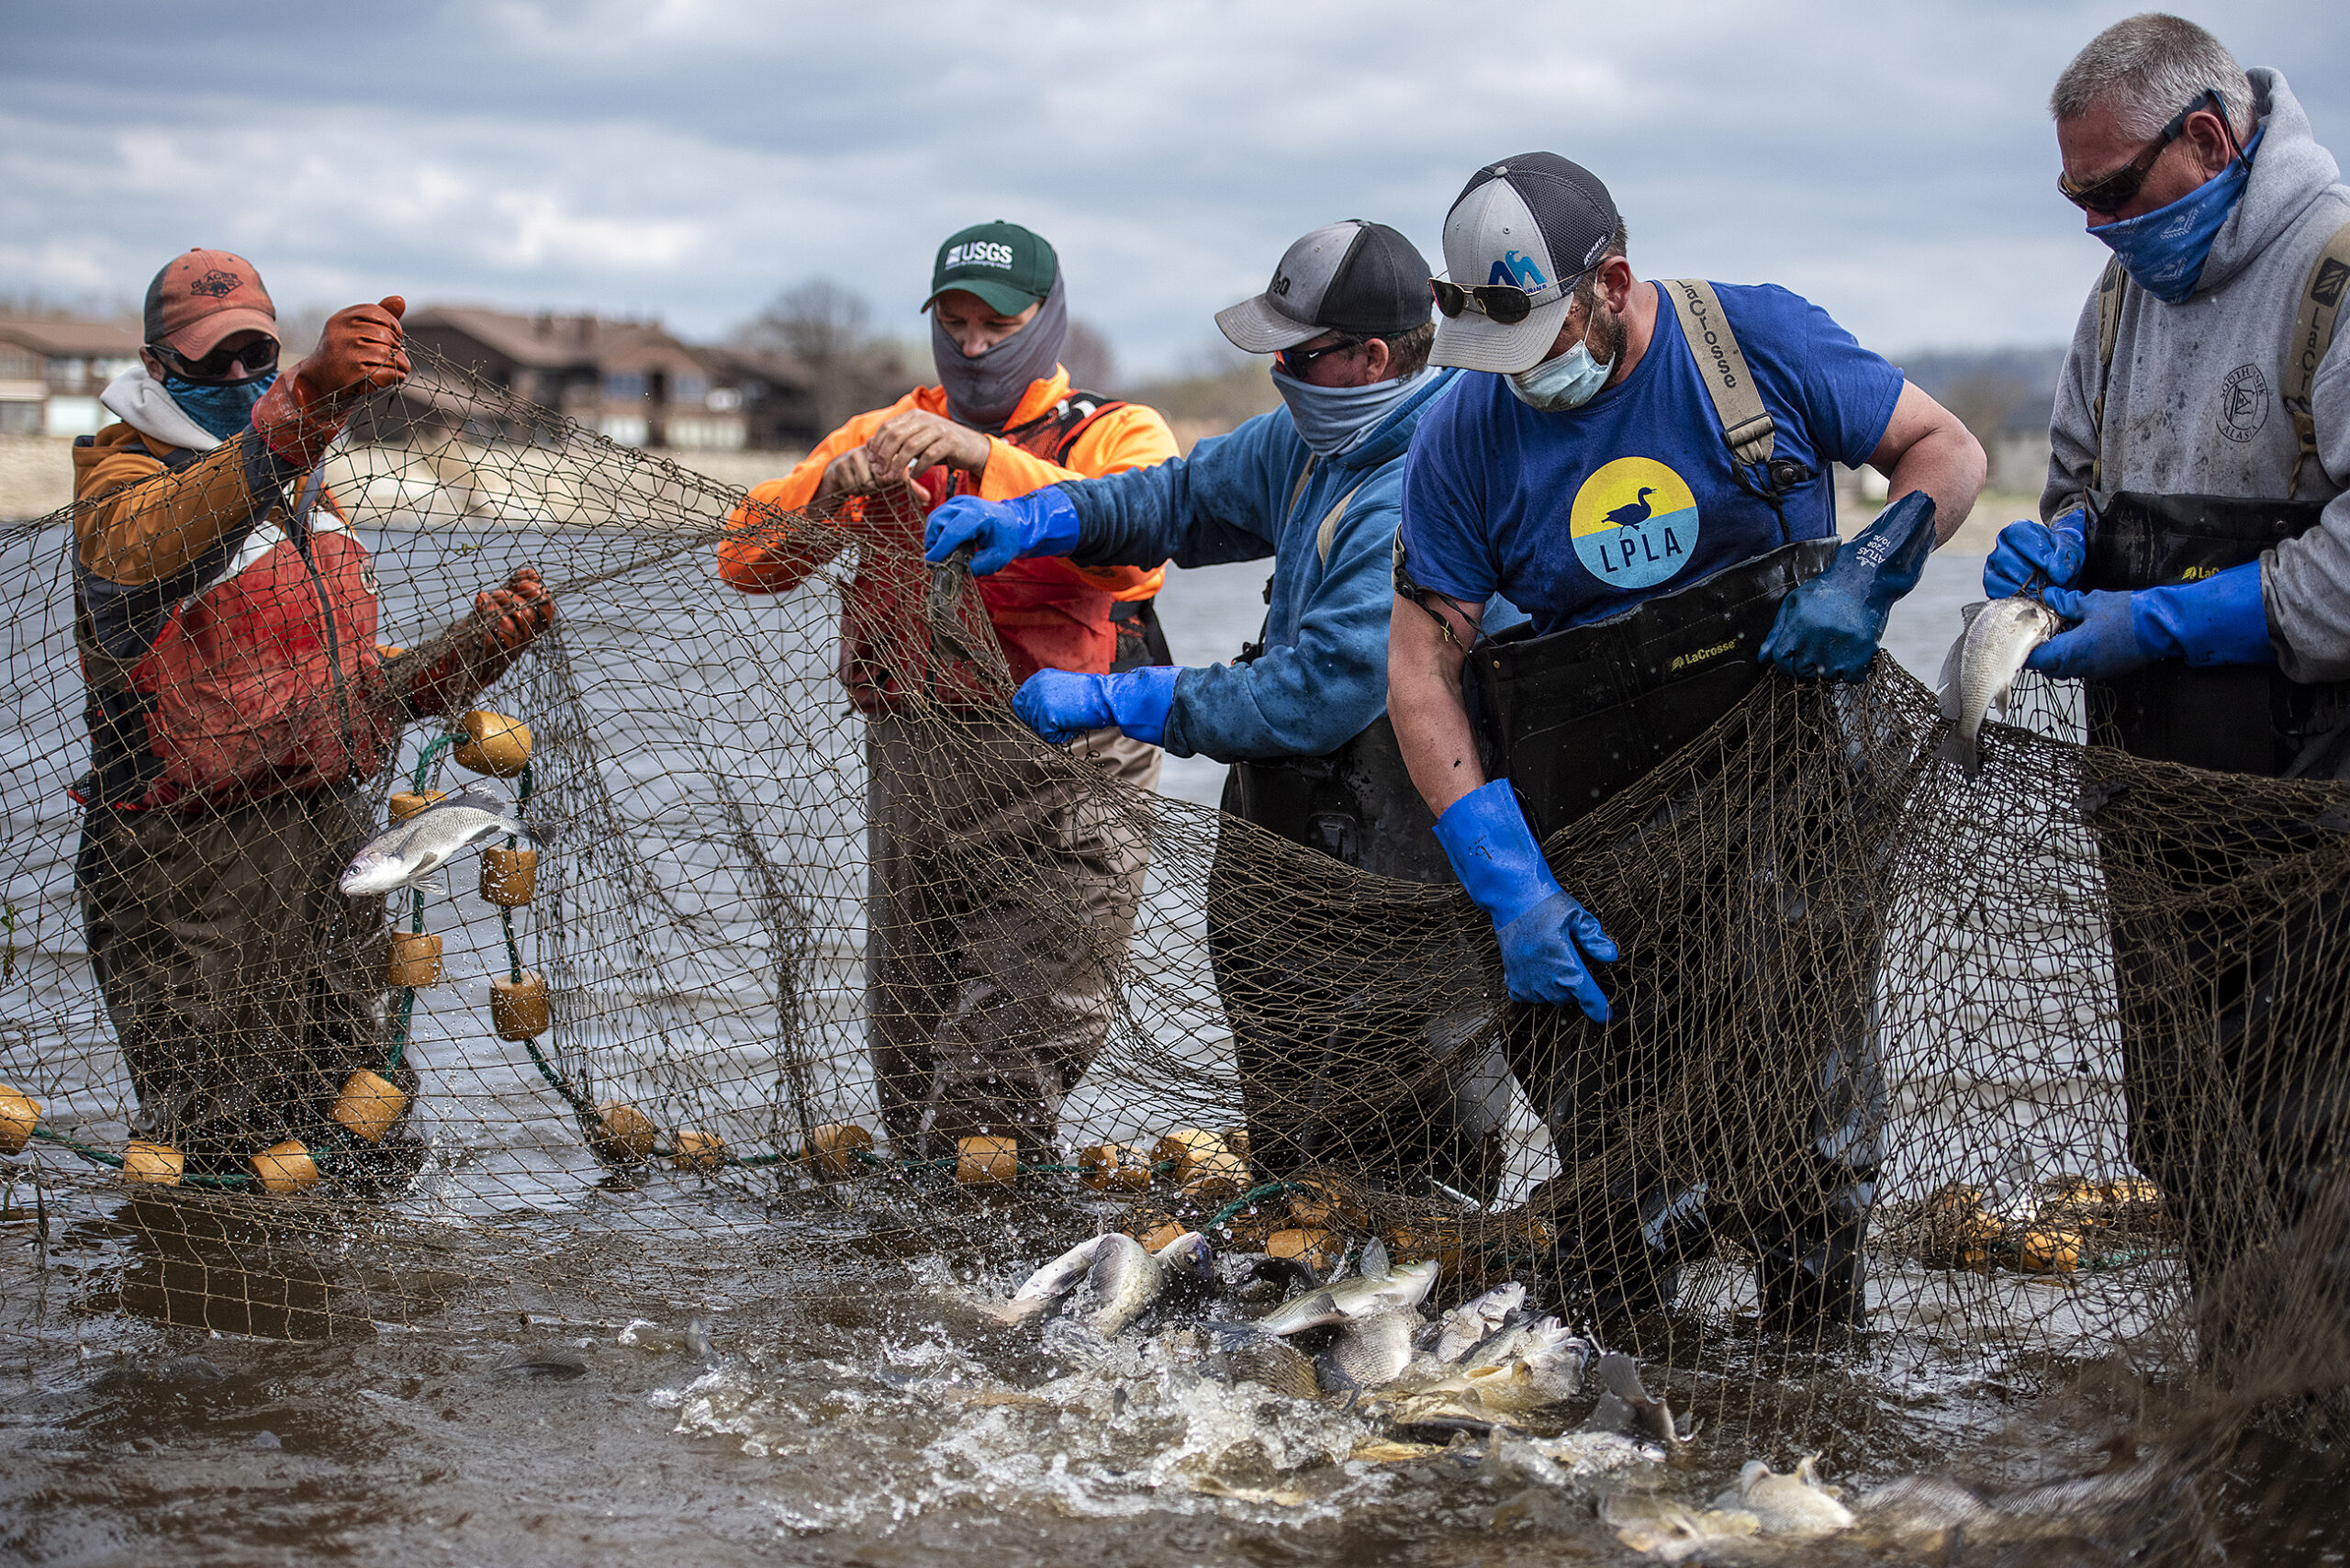 Five workers hold up a net while a mass of fish splash water as they flop around inside the net.